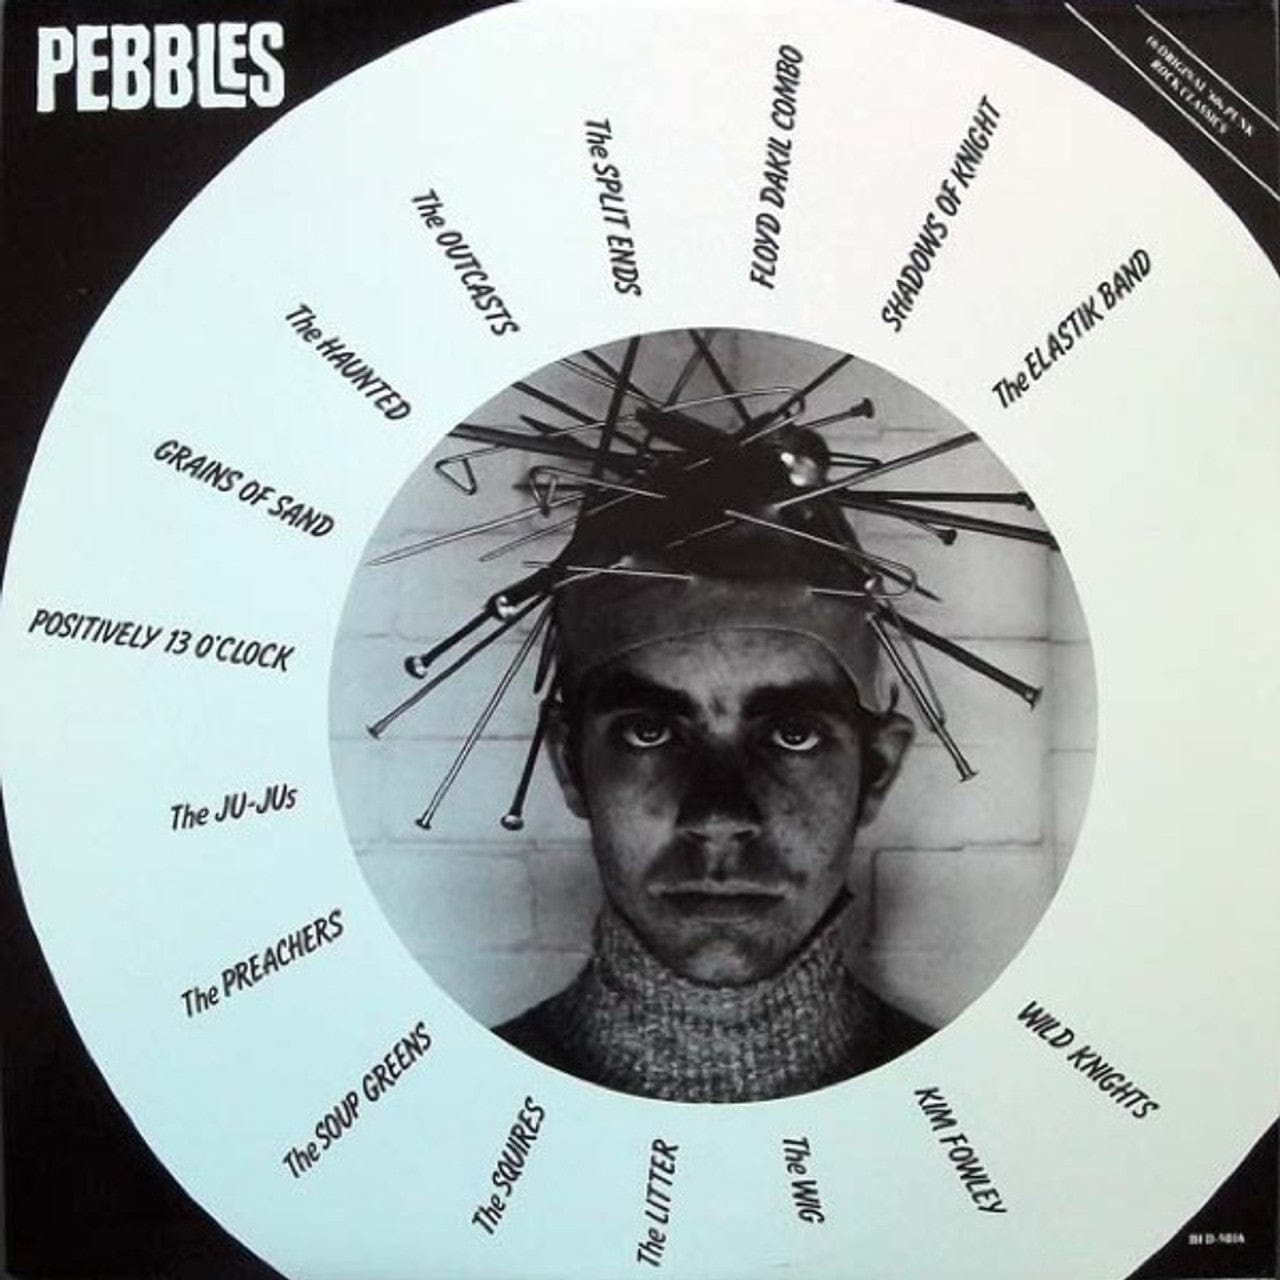 PEBBLES: Original Artyfacts From The First Punk Era • Volume One compilation LP